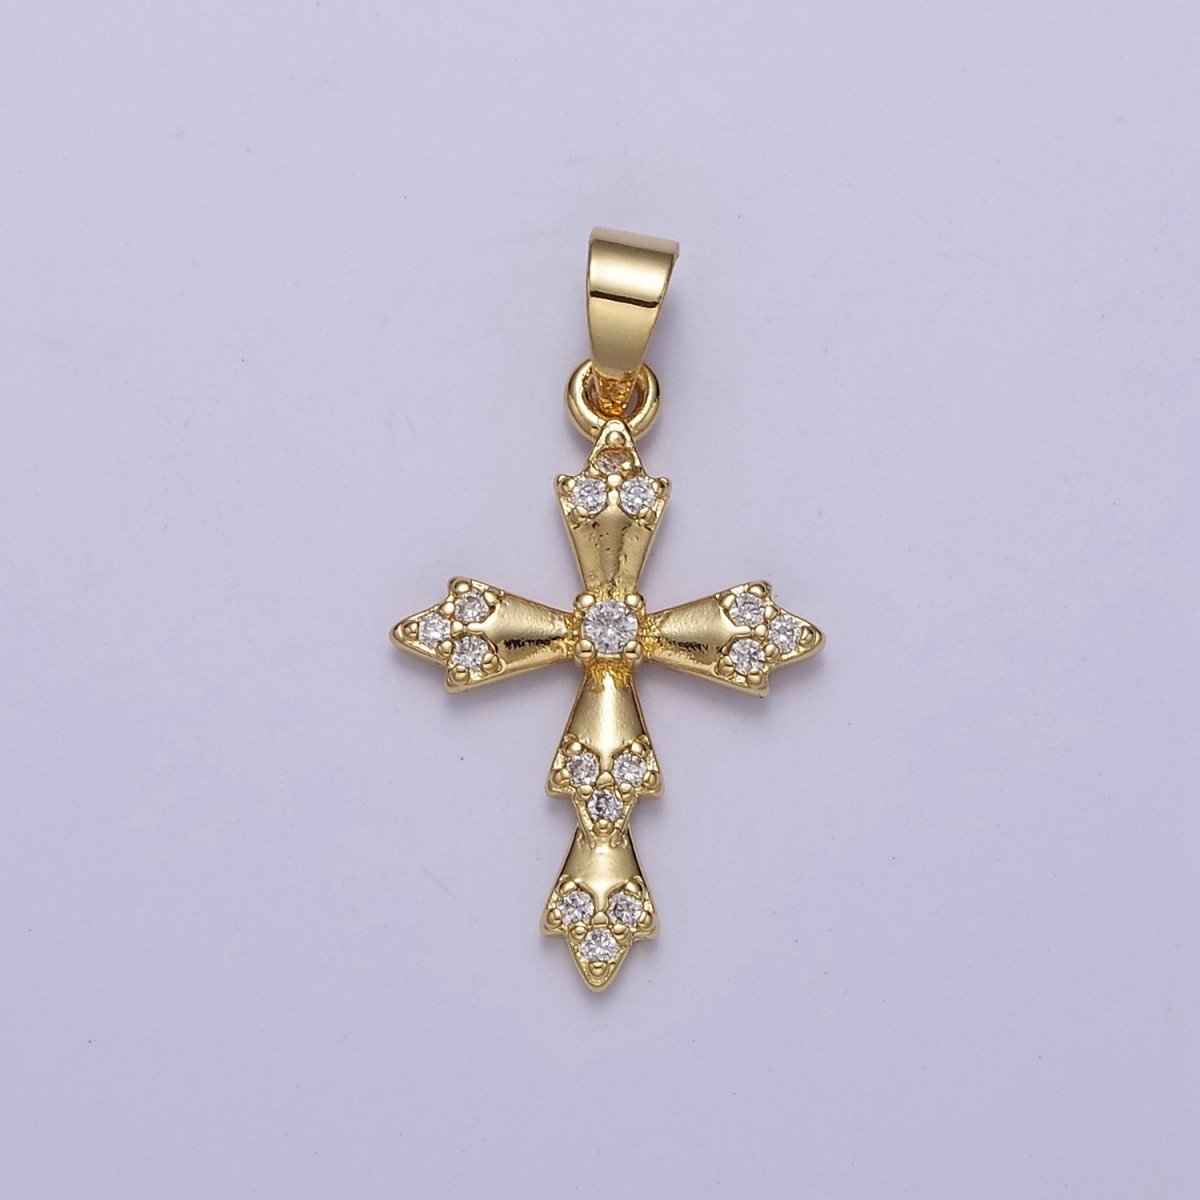 Cross Charm Pendant, Gold Filled Cross with Cubic Zirconia Stone for Religious Minimalist Layering Pendant J-440 - DLUXCA